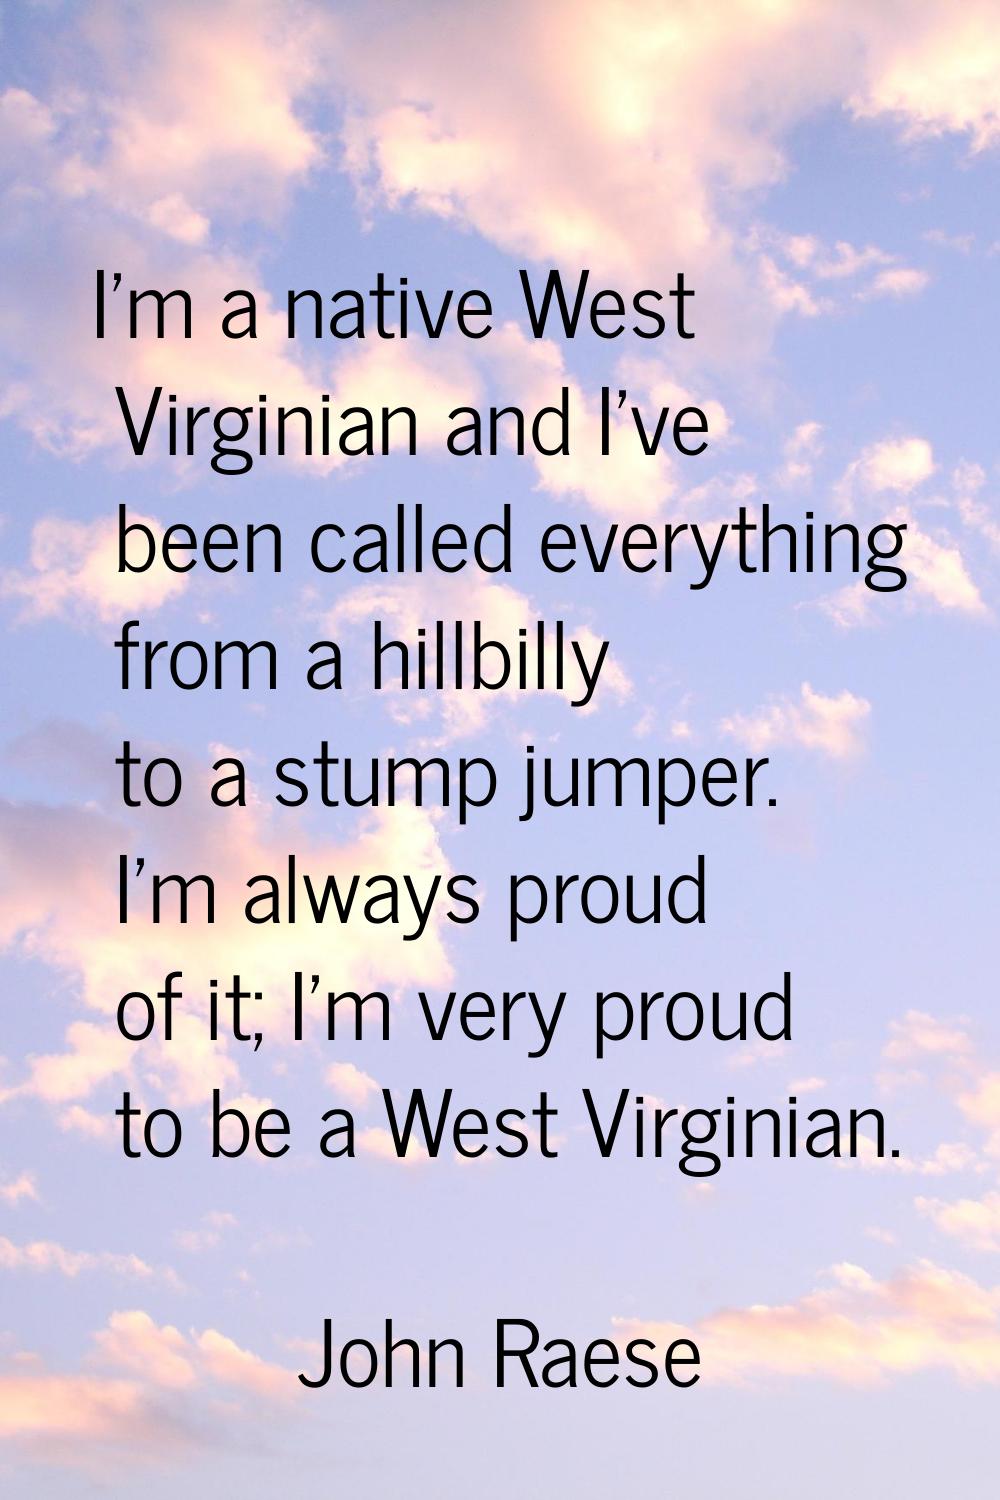 I'm a native West Virginian and I've been called everything from a hillbilly to a stump jumper. I'm